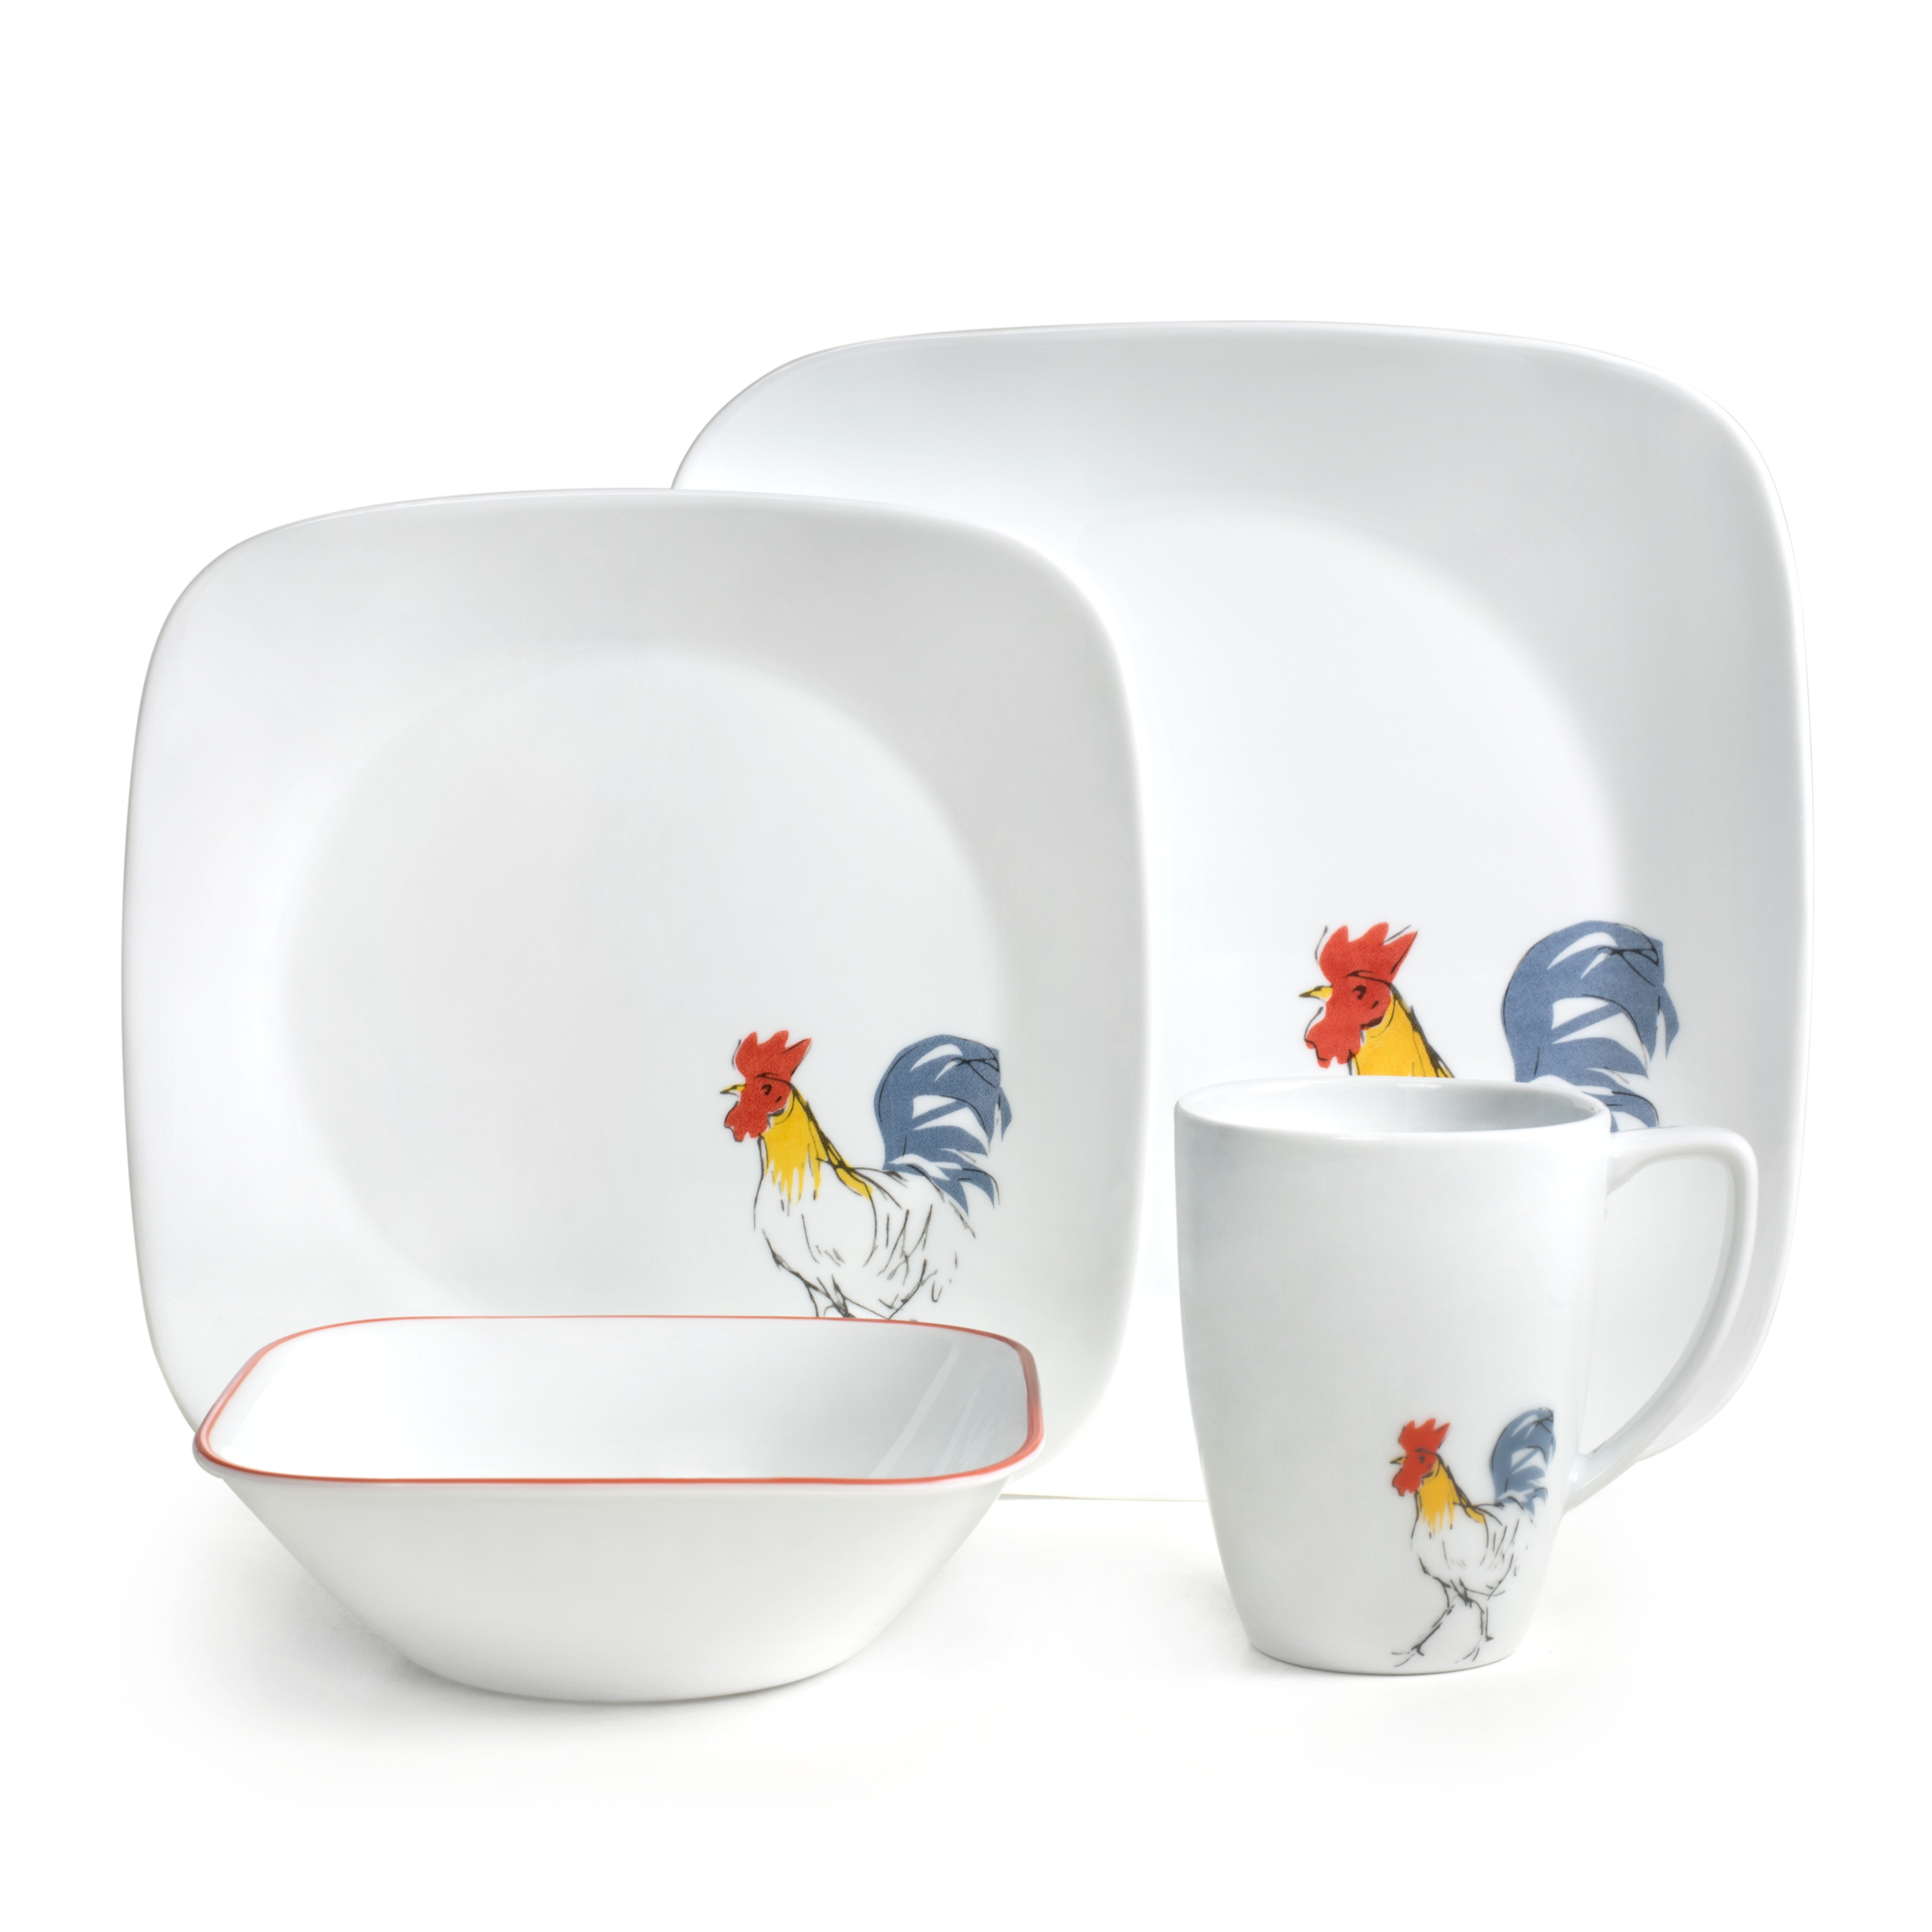 Corelle Country Dawn 16-pc dinnerware set only $17.50